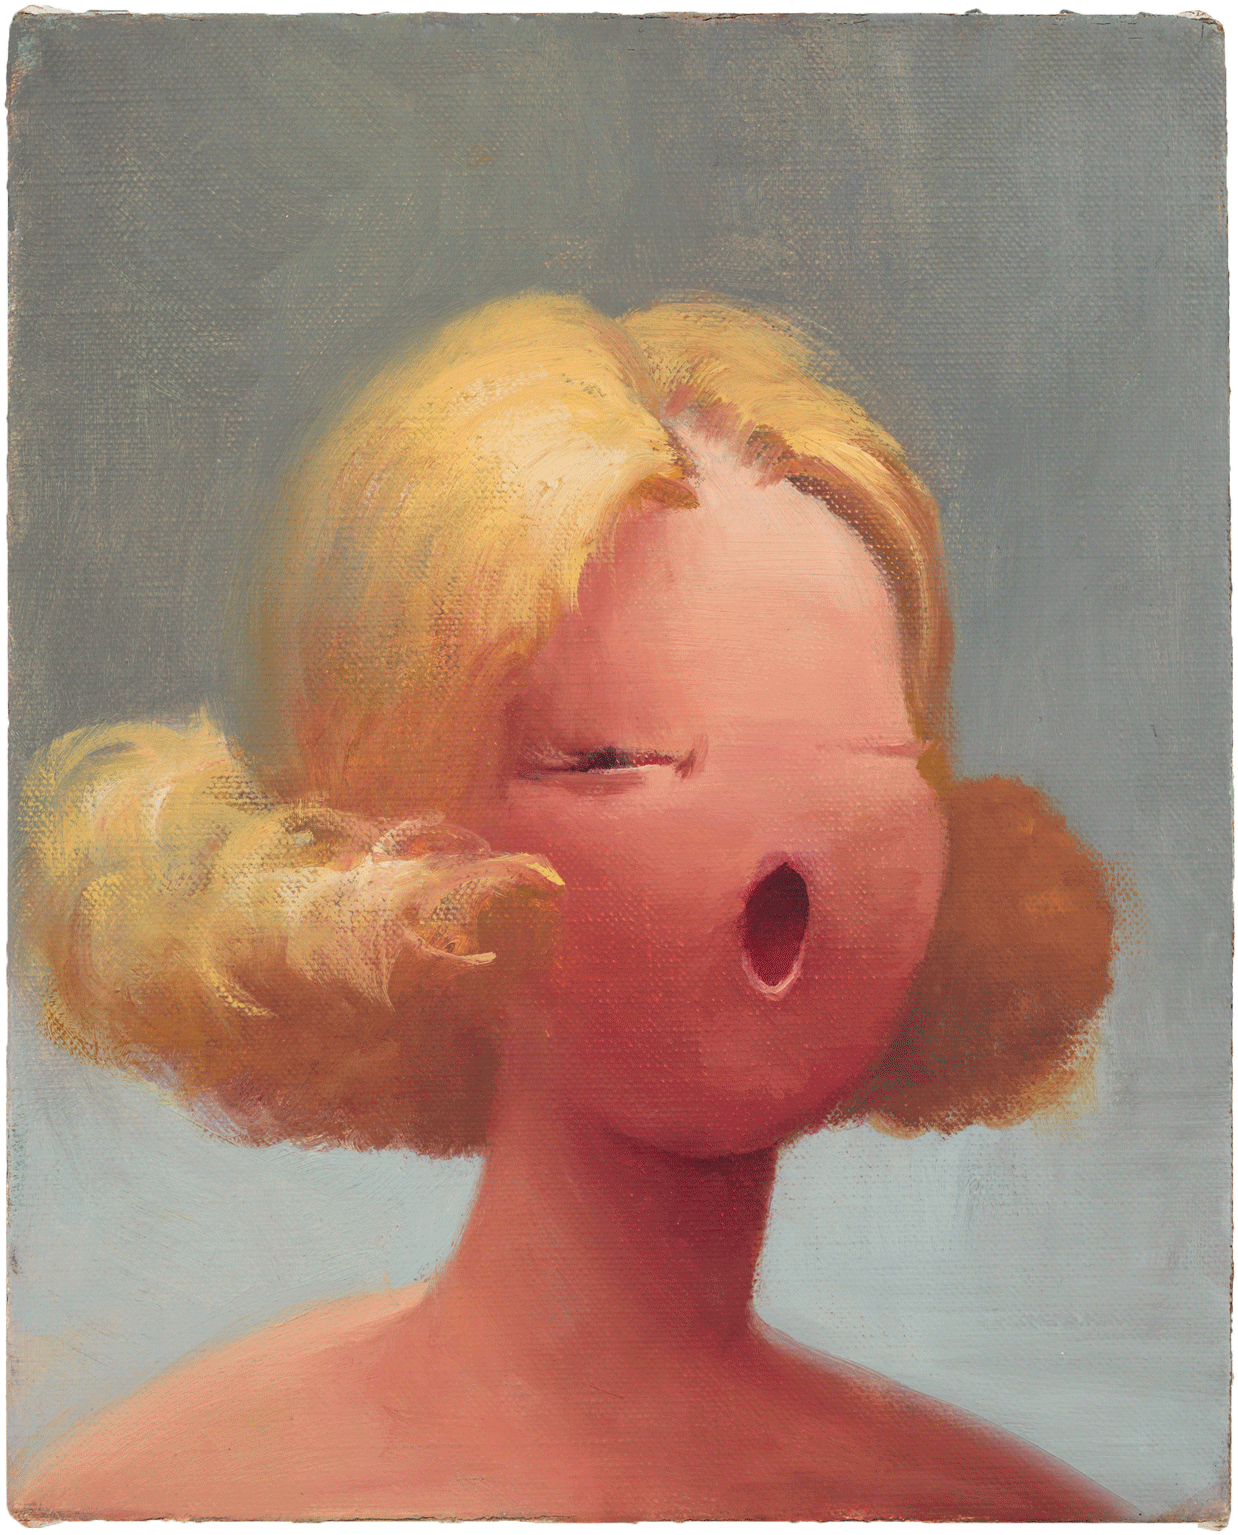 Lisa Yuskavage, Oh 2, 1995, oil on linen, 10 x 8 inches (Private Collection, Milan, image courtesy of David Zwirner Gallery)